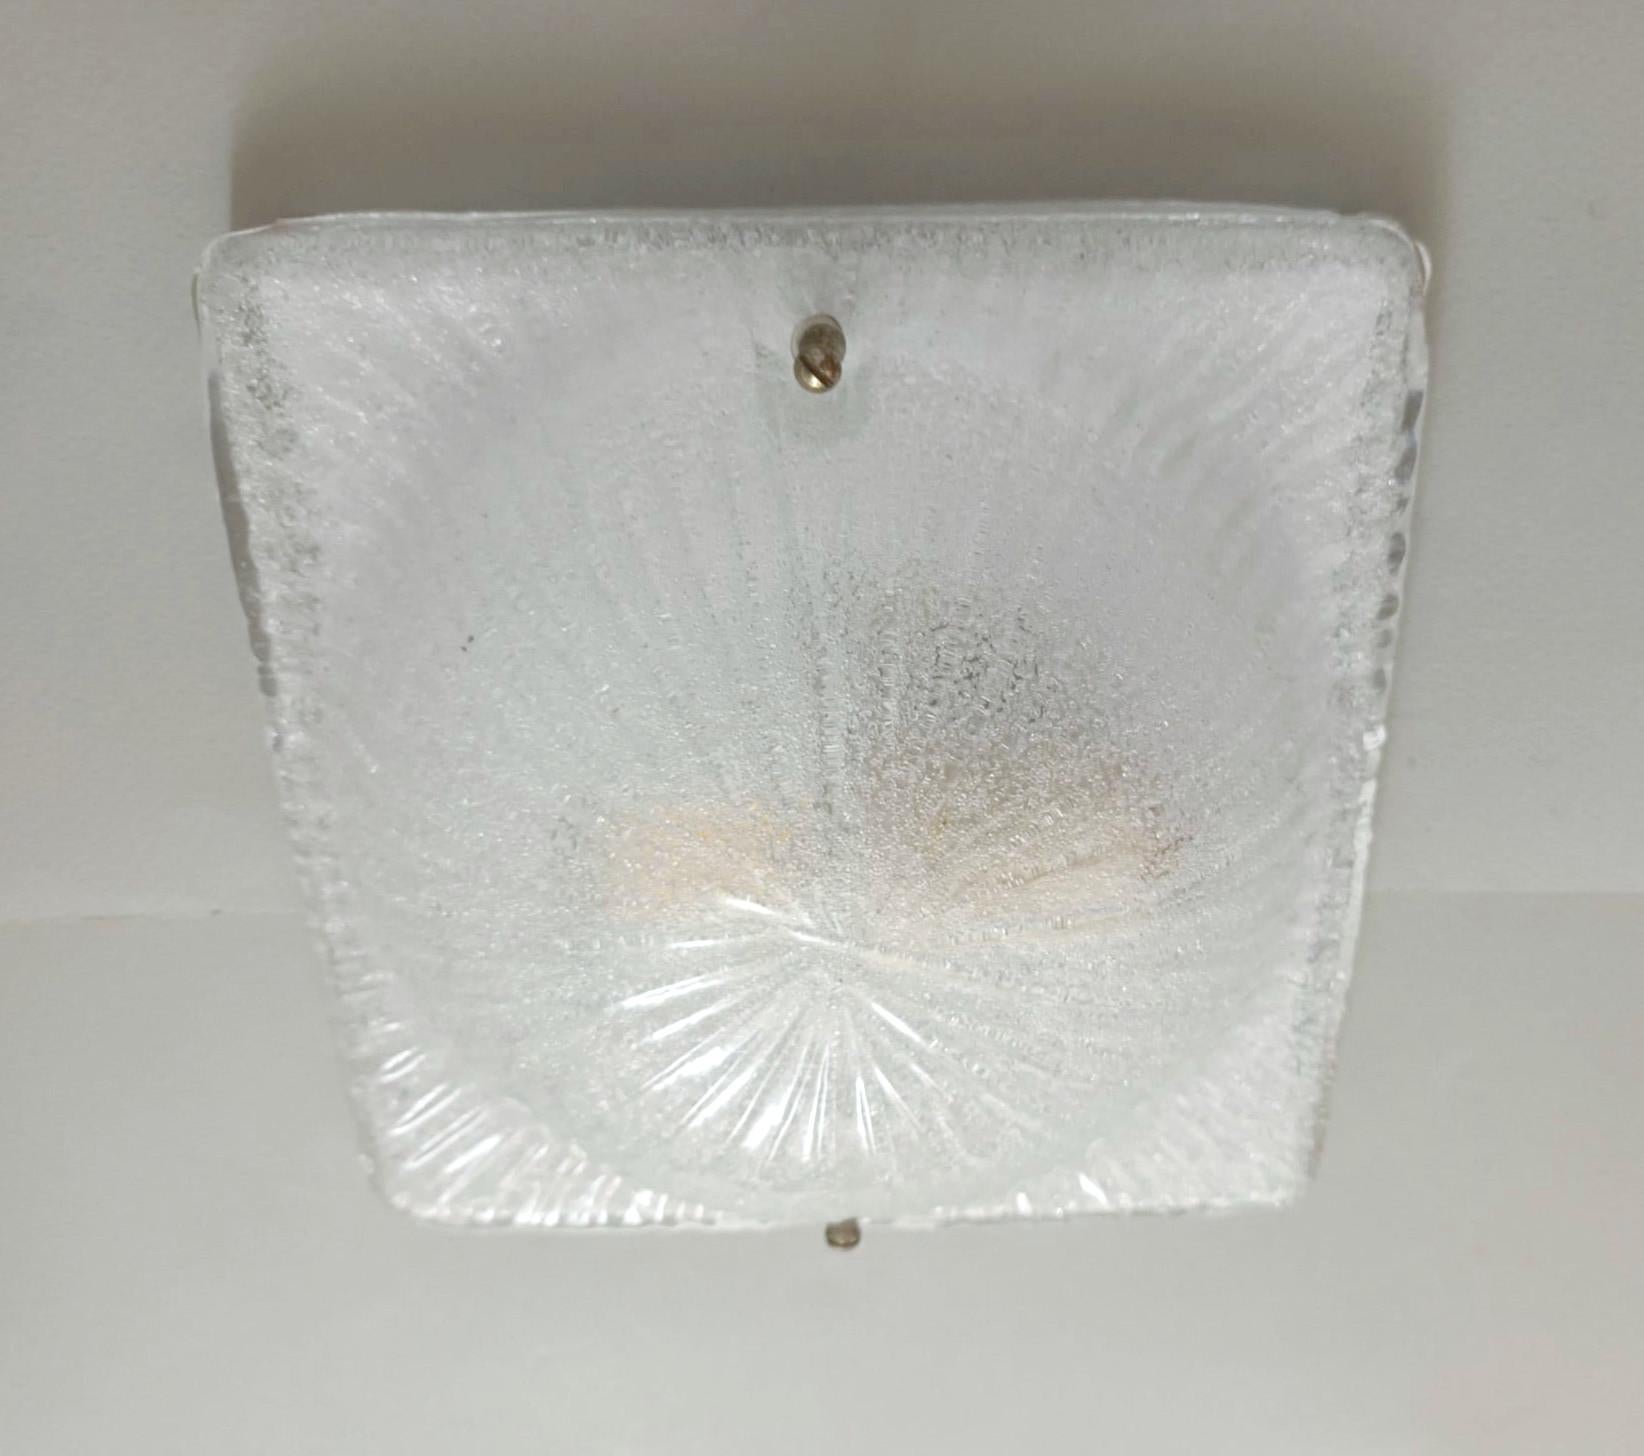 Vintage Italian flush mount or wall light with a single square graniglia Murano glass shade / Made in Italy in the style of Mazzega, circa 1960s
Measures: width 8 inches, length 8 inches, height 3 inches
1 light / E26 or E27 type / max 60W
2